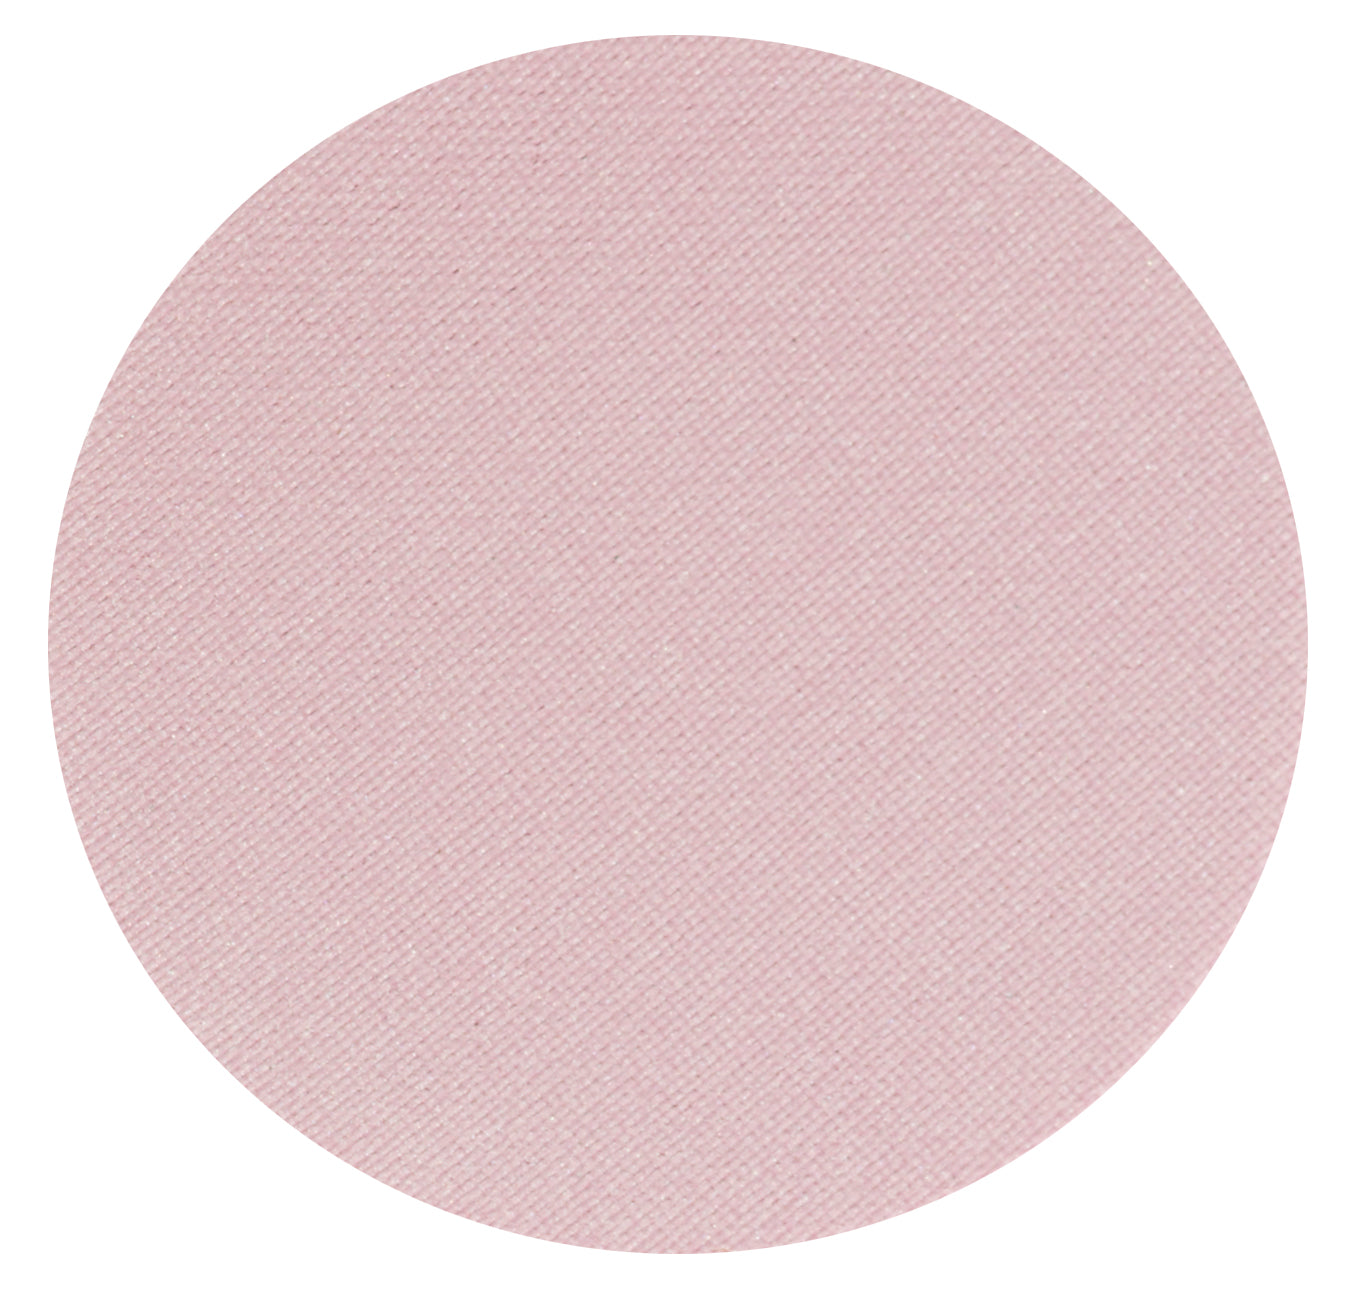 Close-up swatch of single pan Odylique organic eyeshadow in shade Shell a pale pink with a pearly sheen.